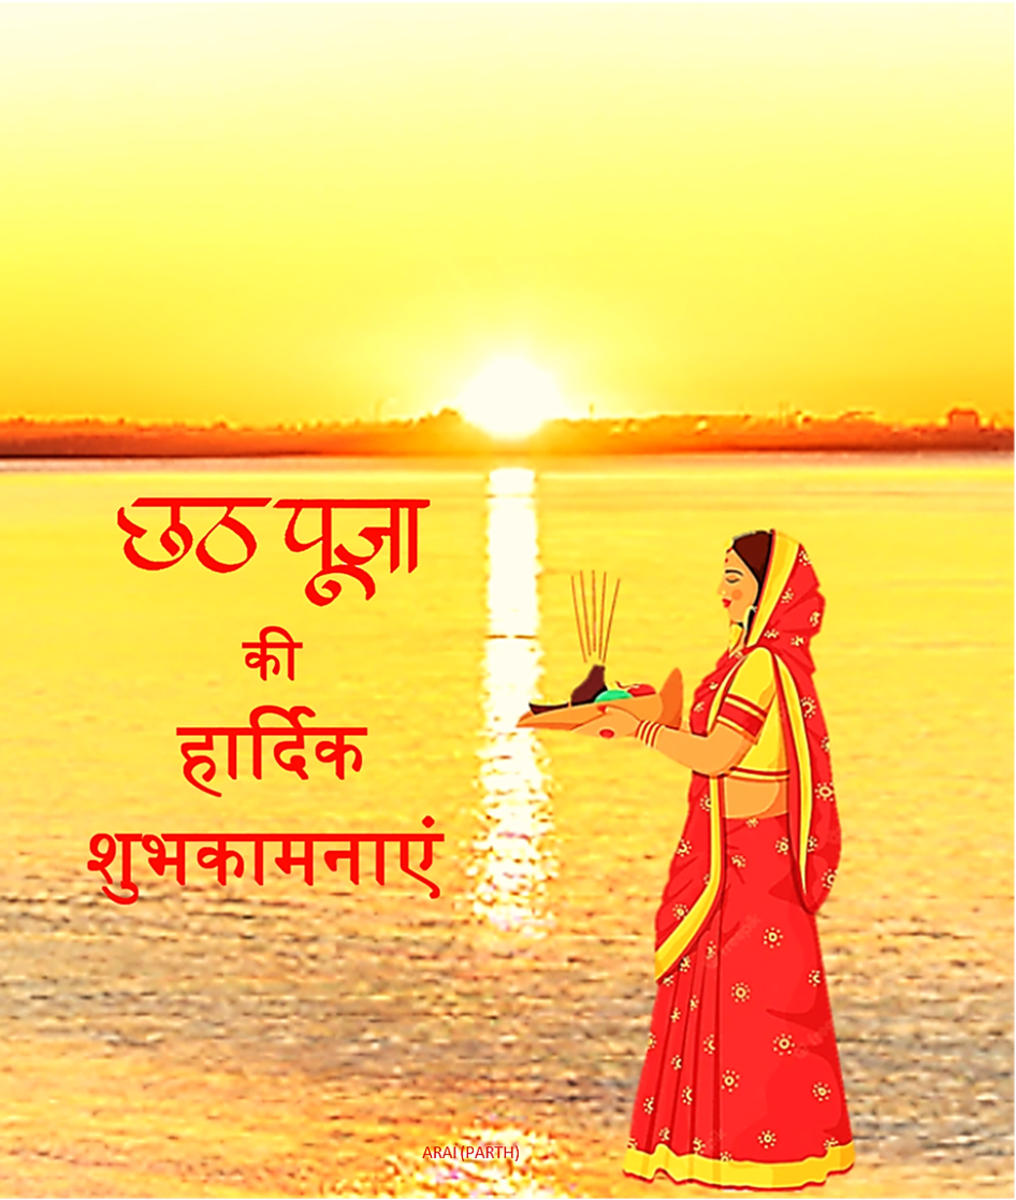 Chhath Puja Wishes and Greetings in Hindi Language